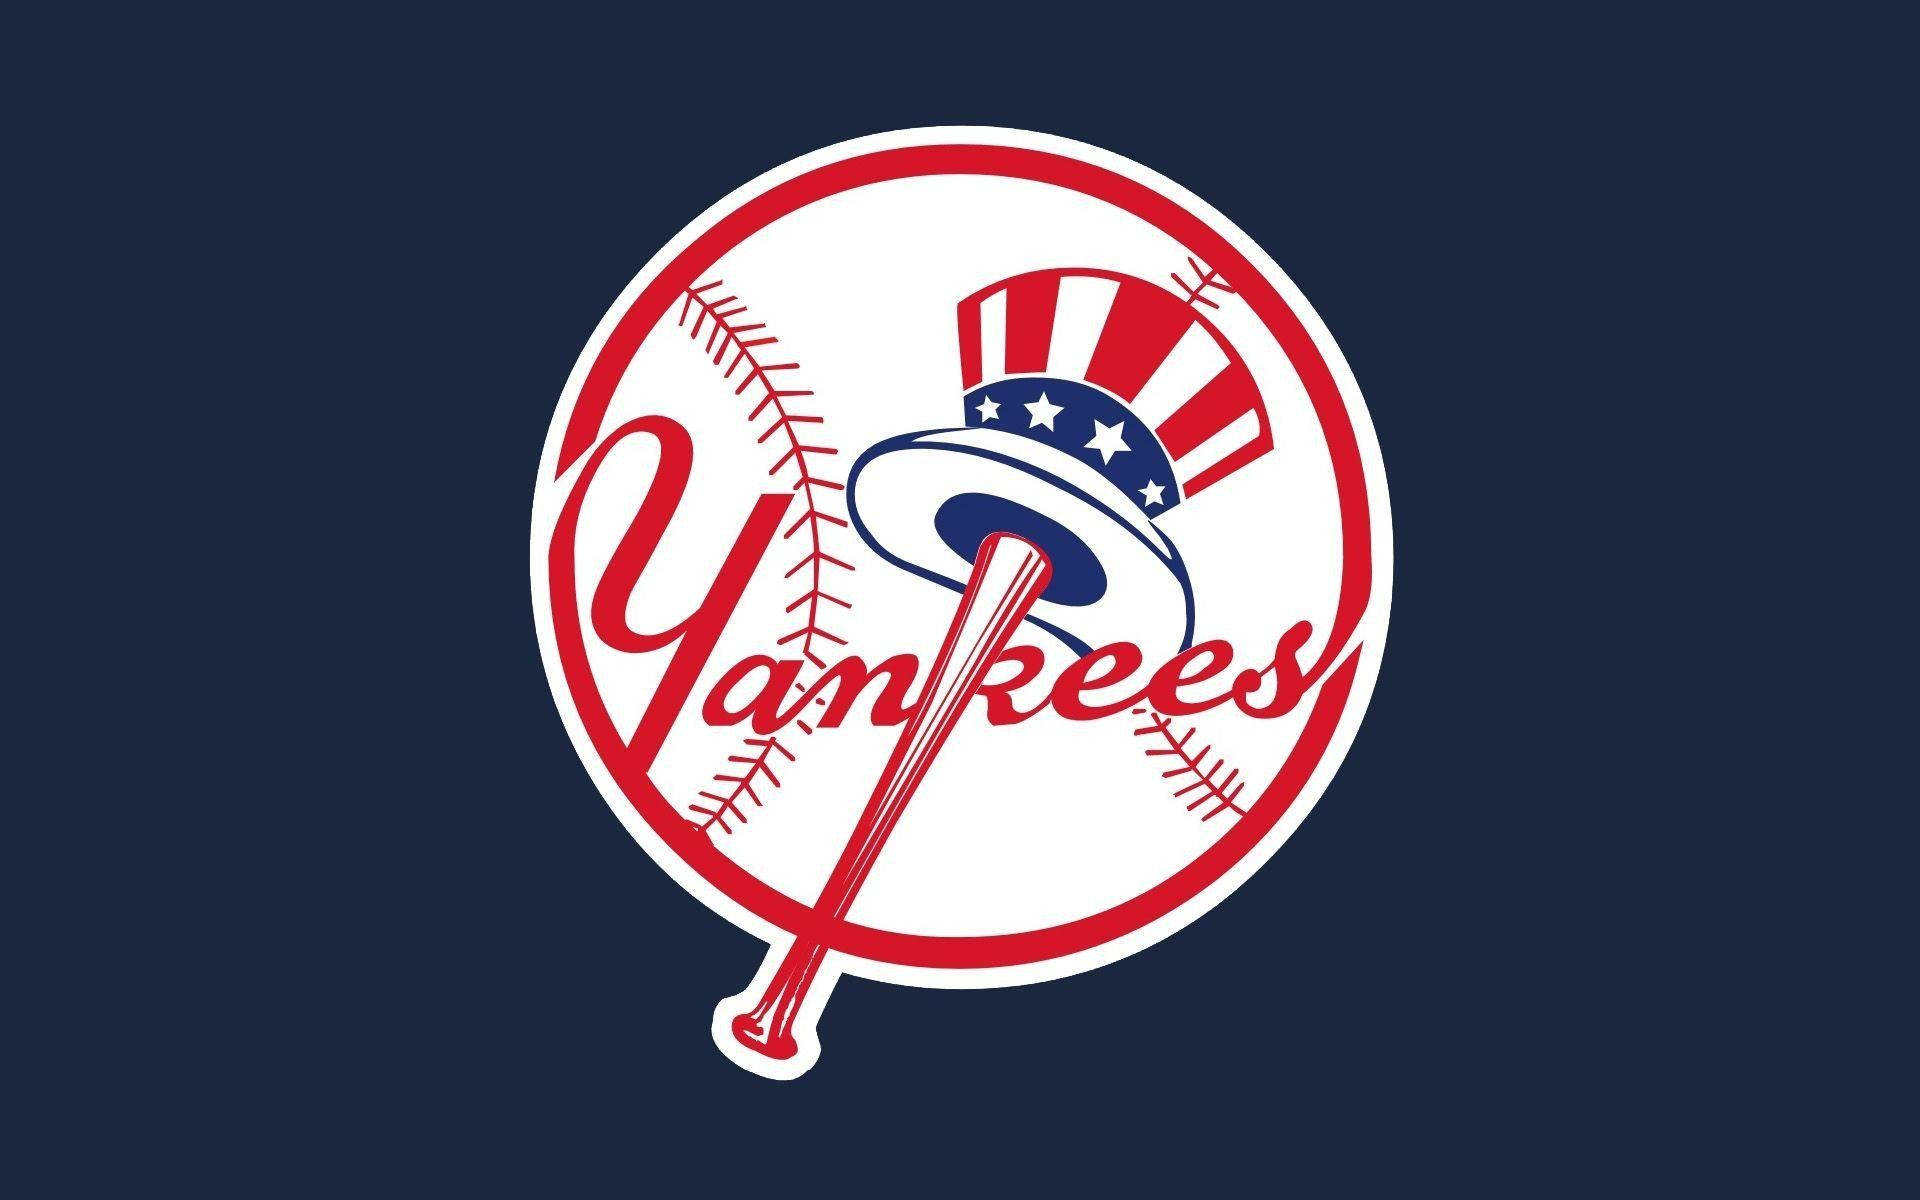 New York Yankees worth US71bn as average MLB franchise value climbs 2  says study SportsPro